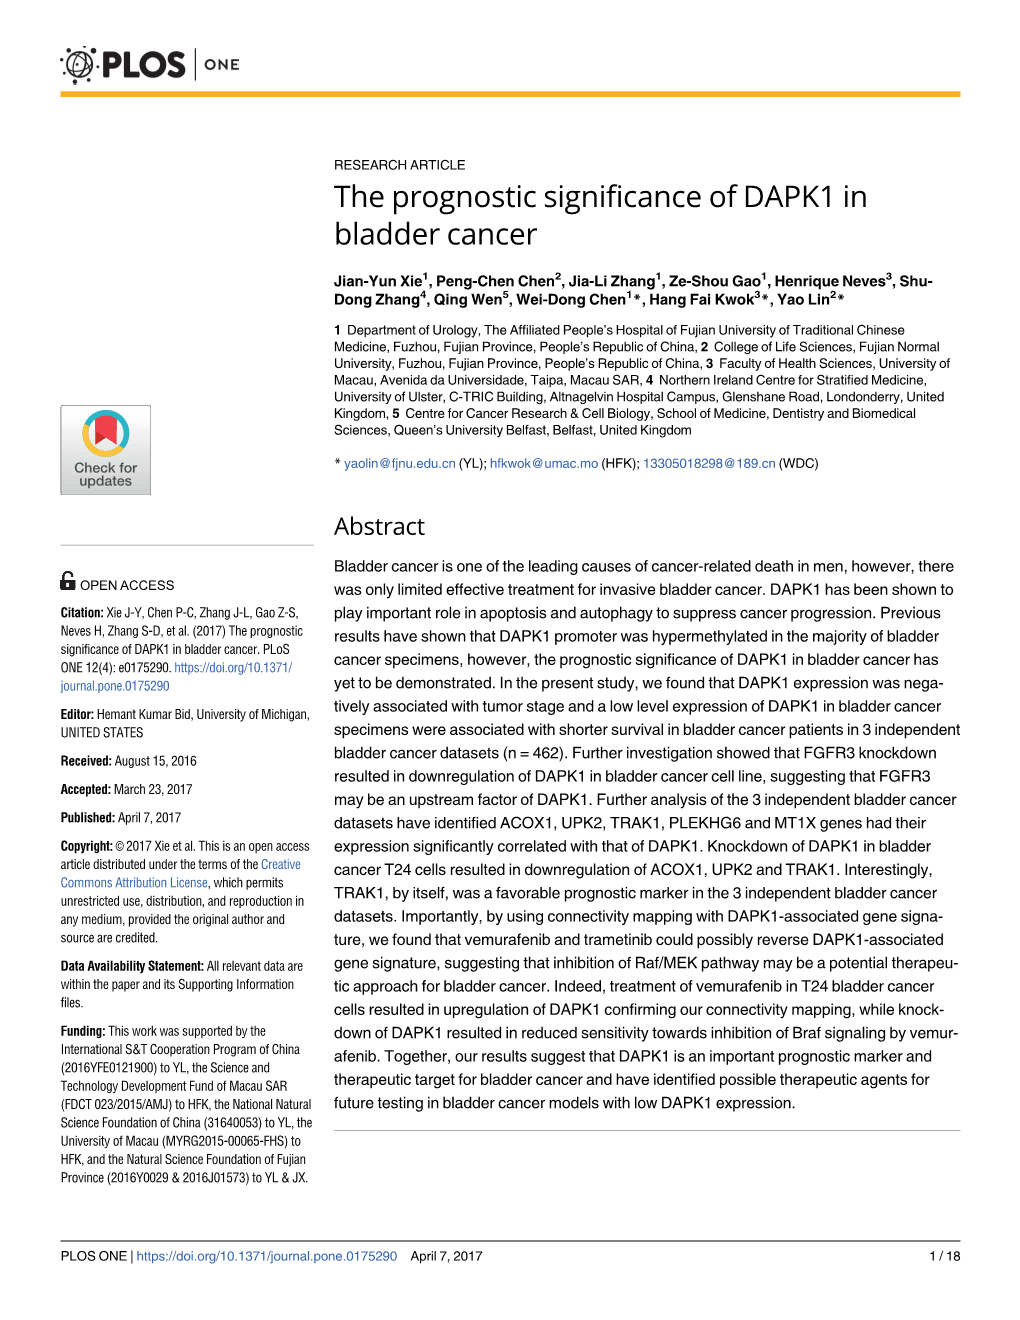 The Prognostic Significance of DAPK1 in Bladder Cancer